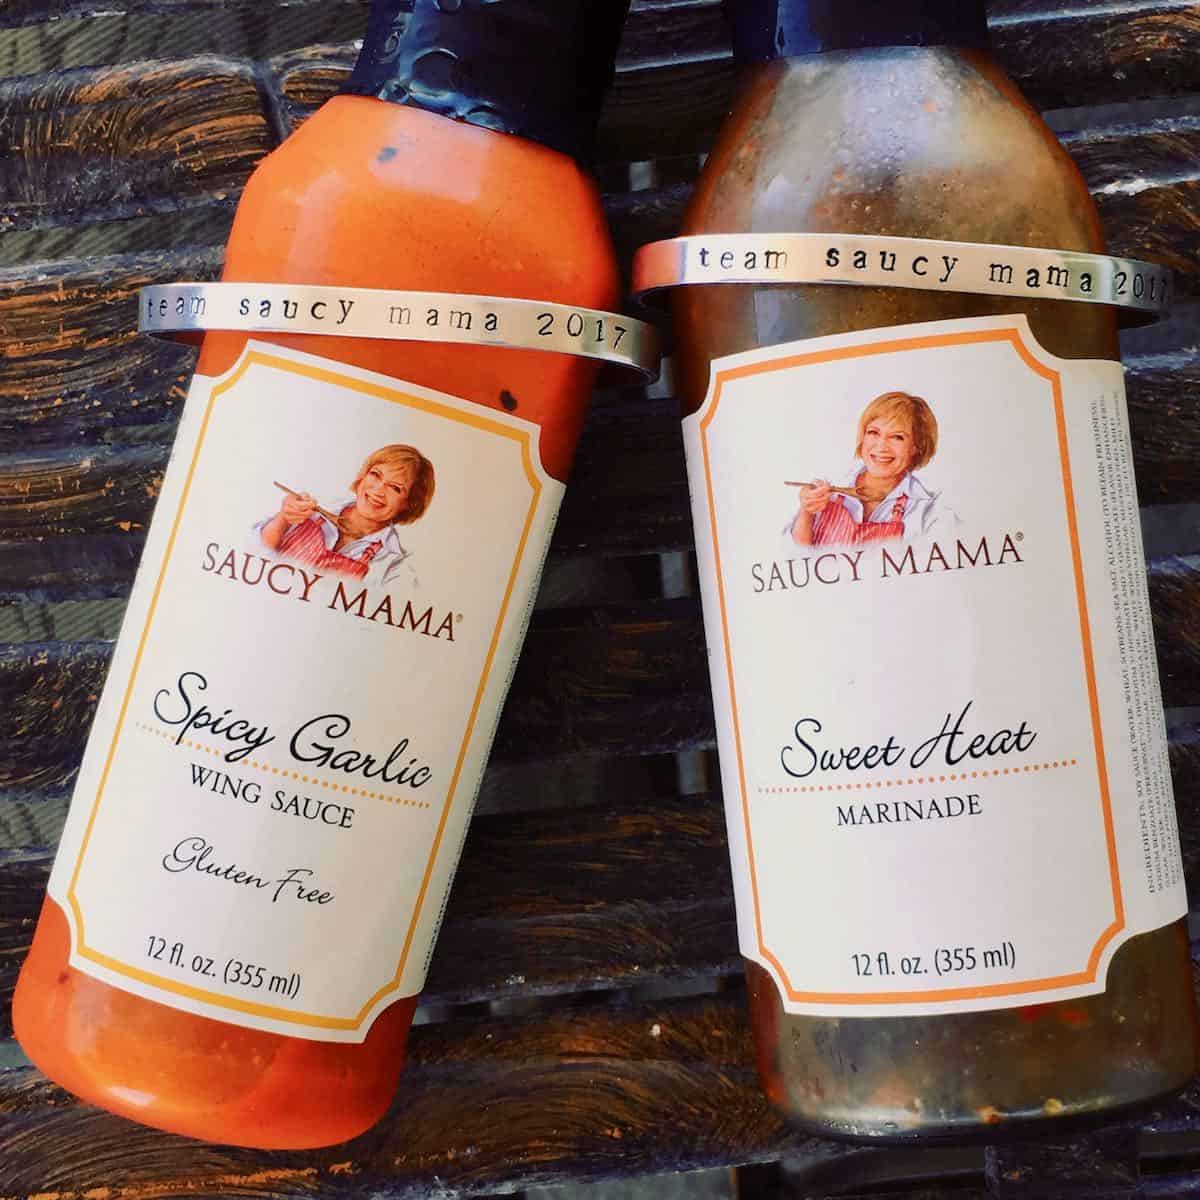 Saucy Mama products